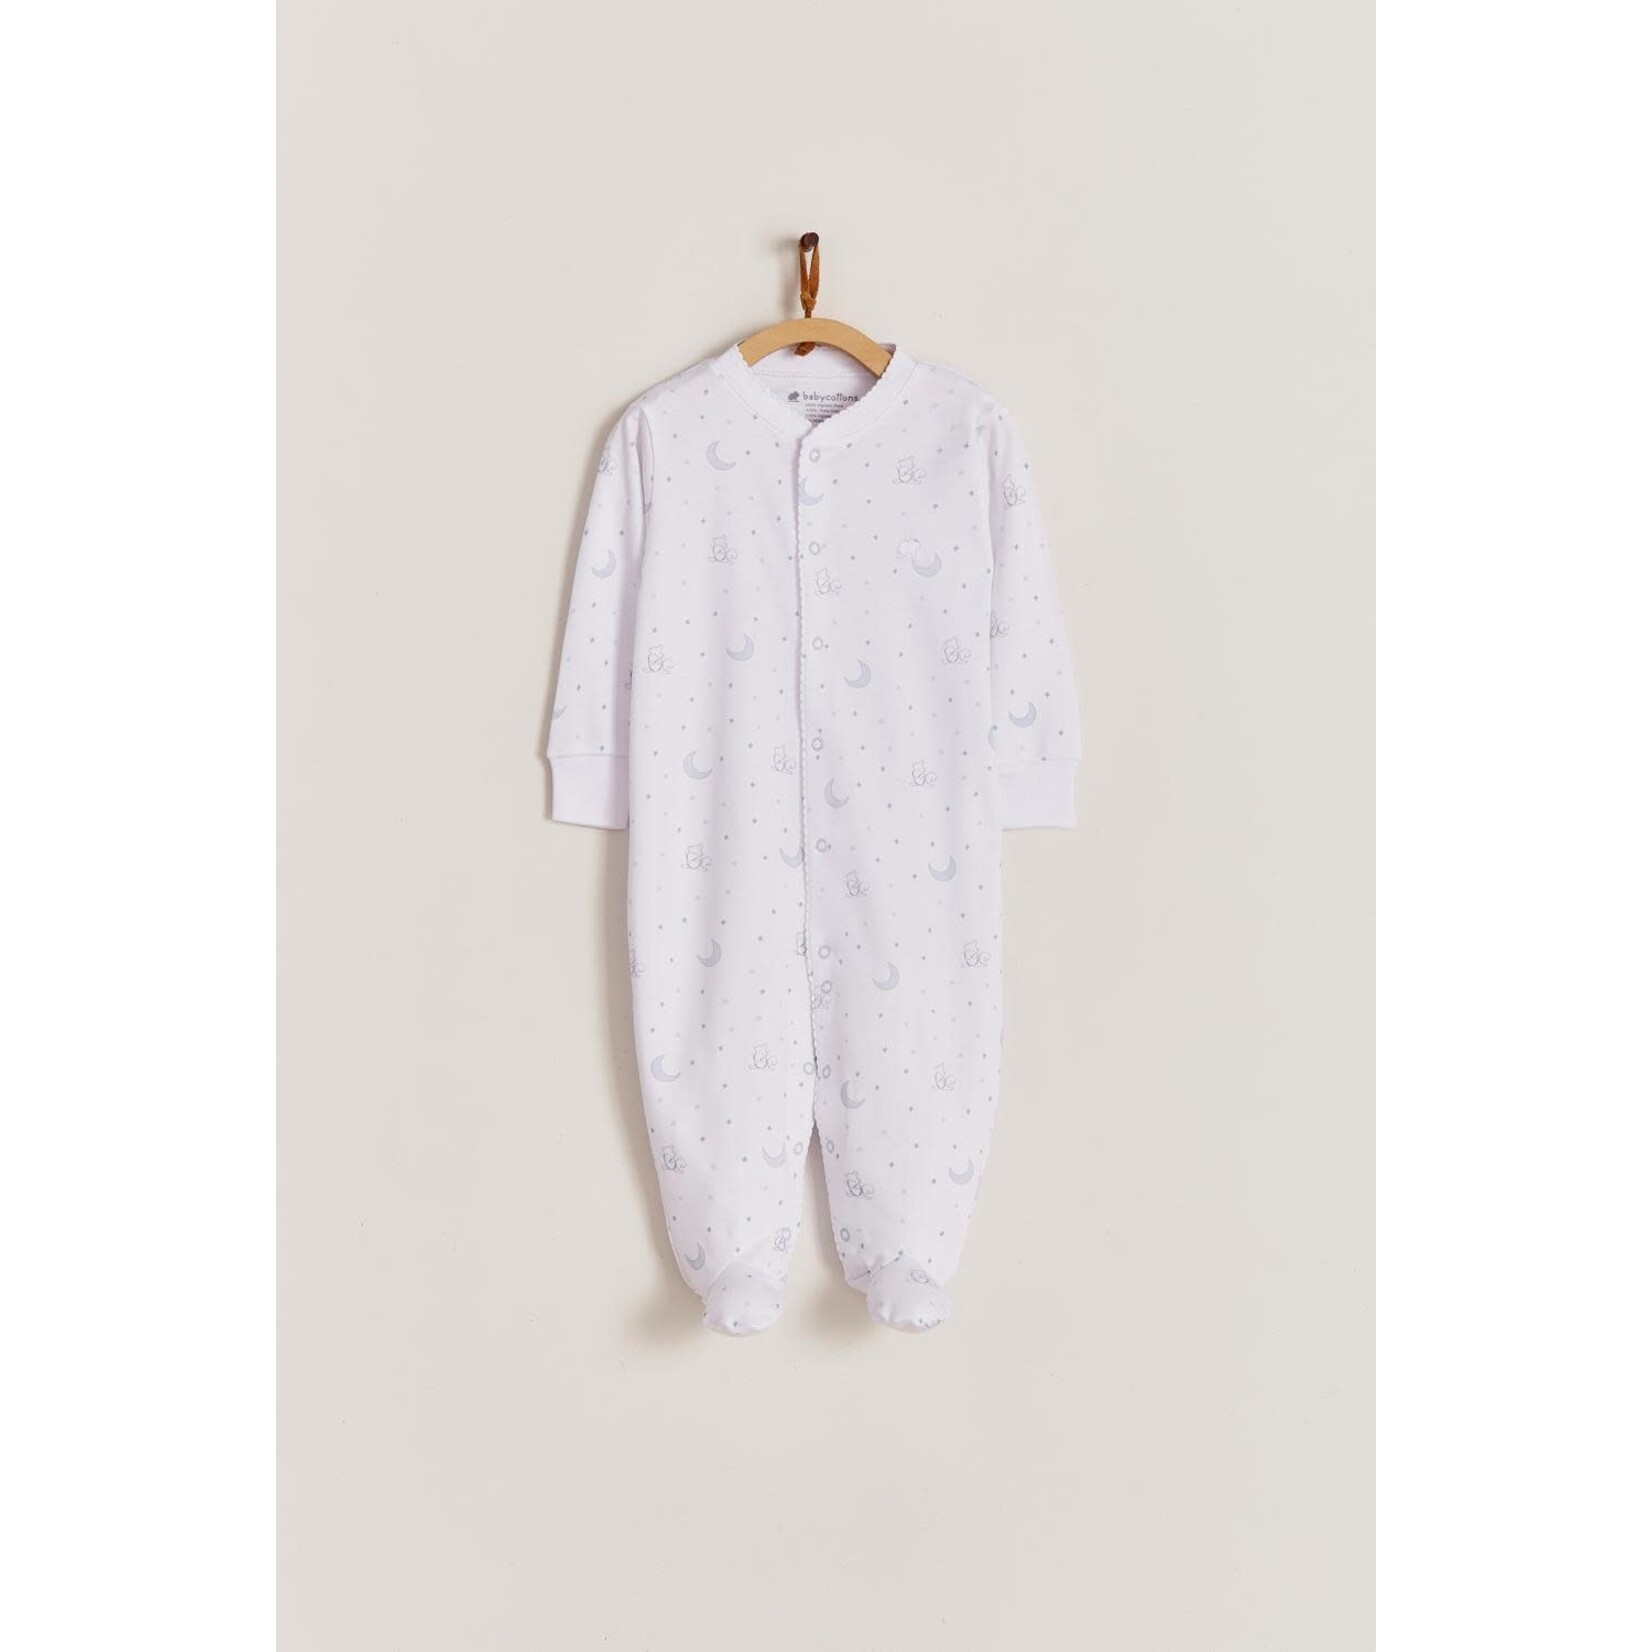 Babycottons Gustav in the Sky Footed Pajama